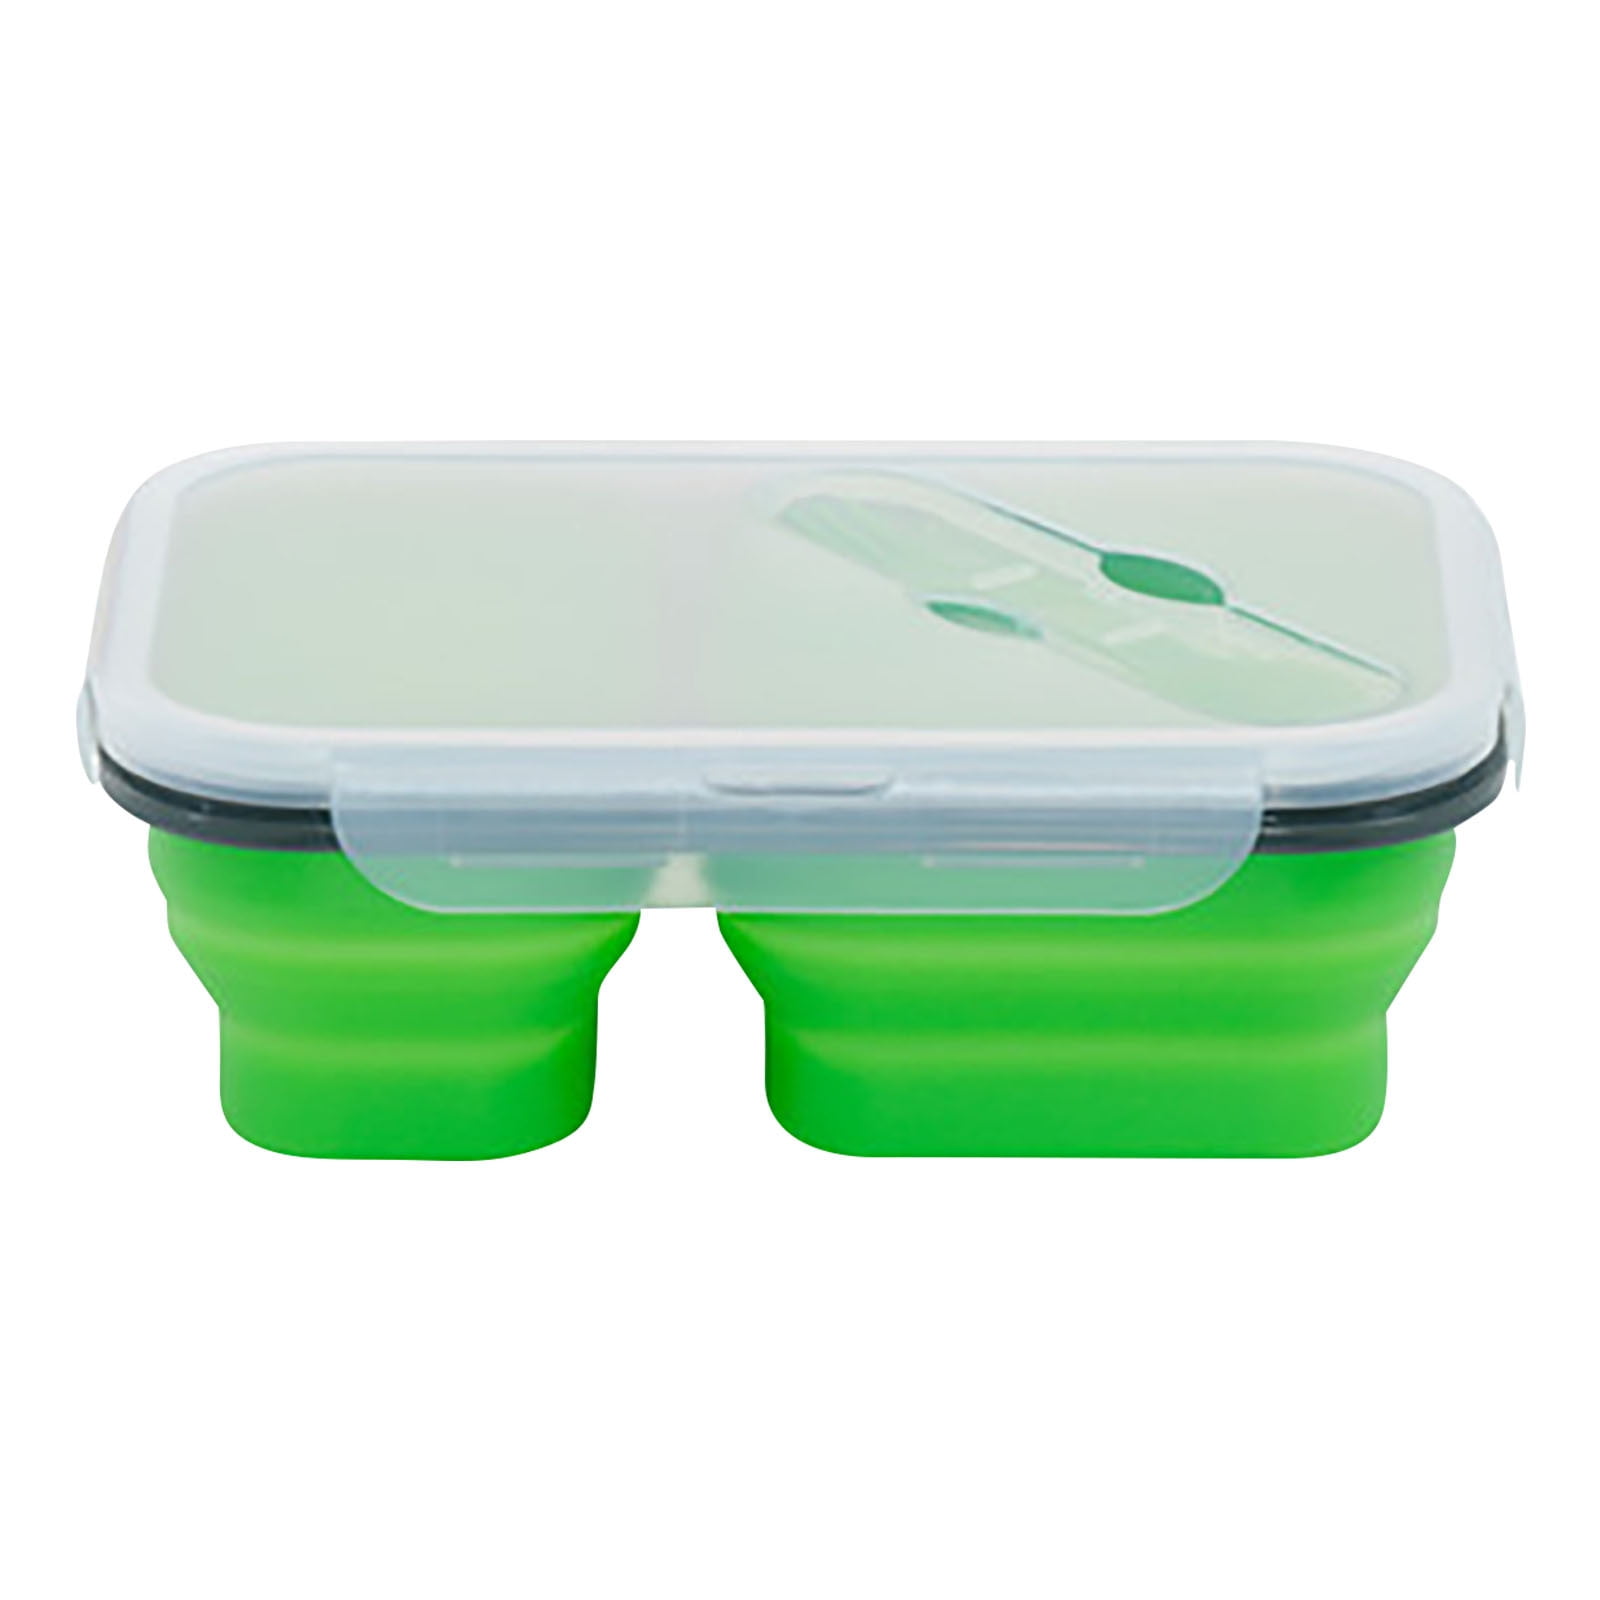 XMMSWDLA folding Bento Box, Lunch Dishwasher Premium 2 and Compartment, Airtight Lid, Snap-Top , Microwave Spoon Silicone, Box Safe,with